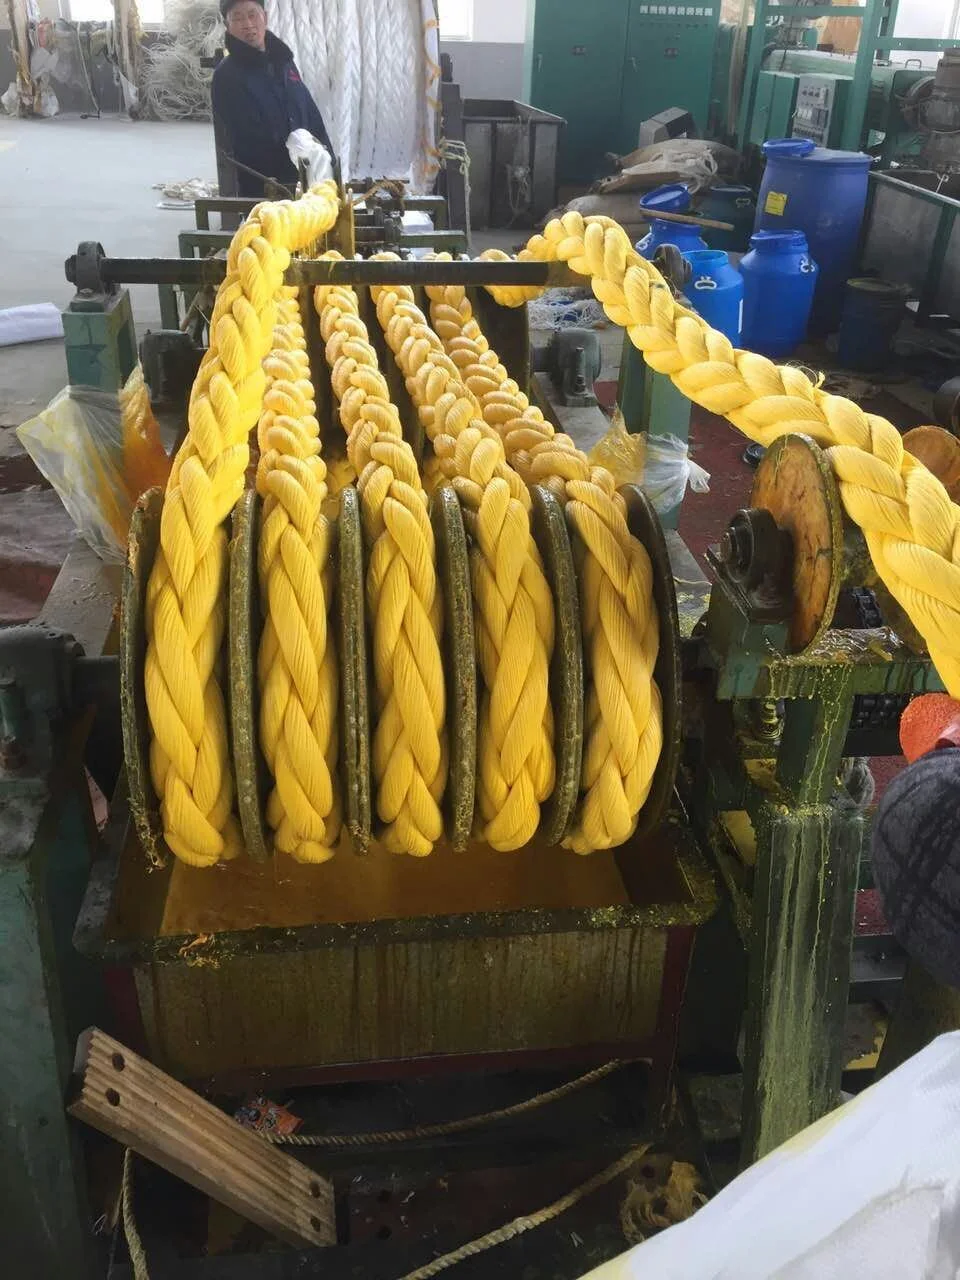 Polyester Rope / Mooring Rope / Tow Rope